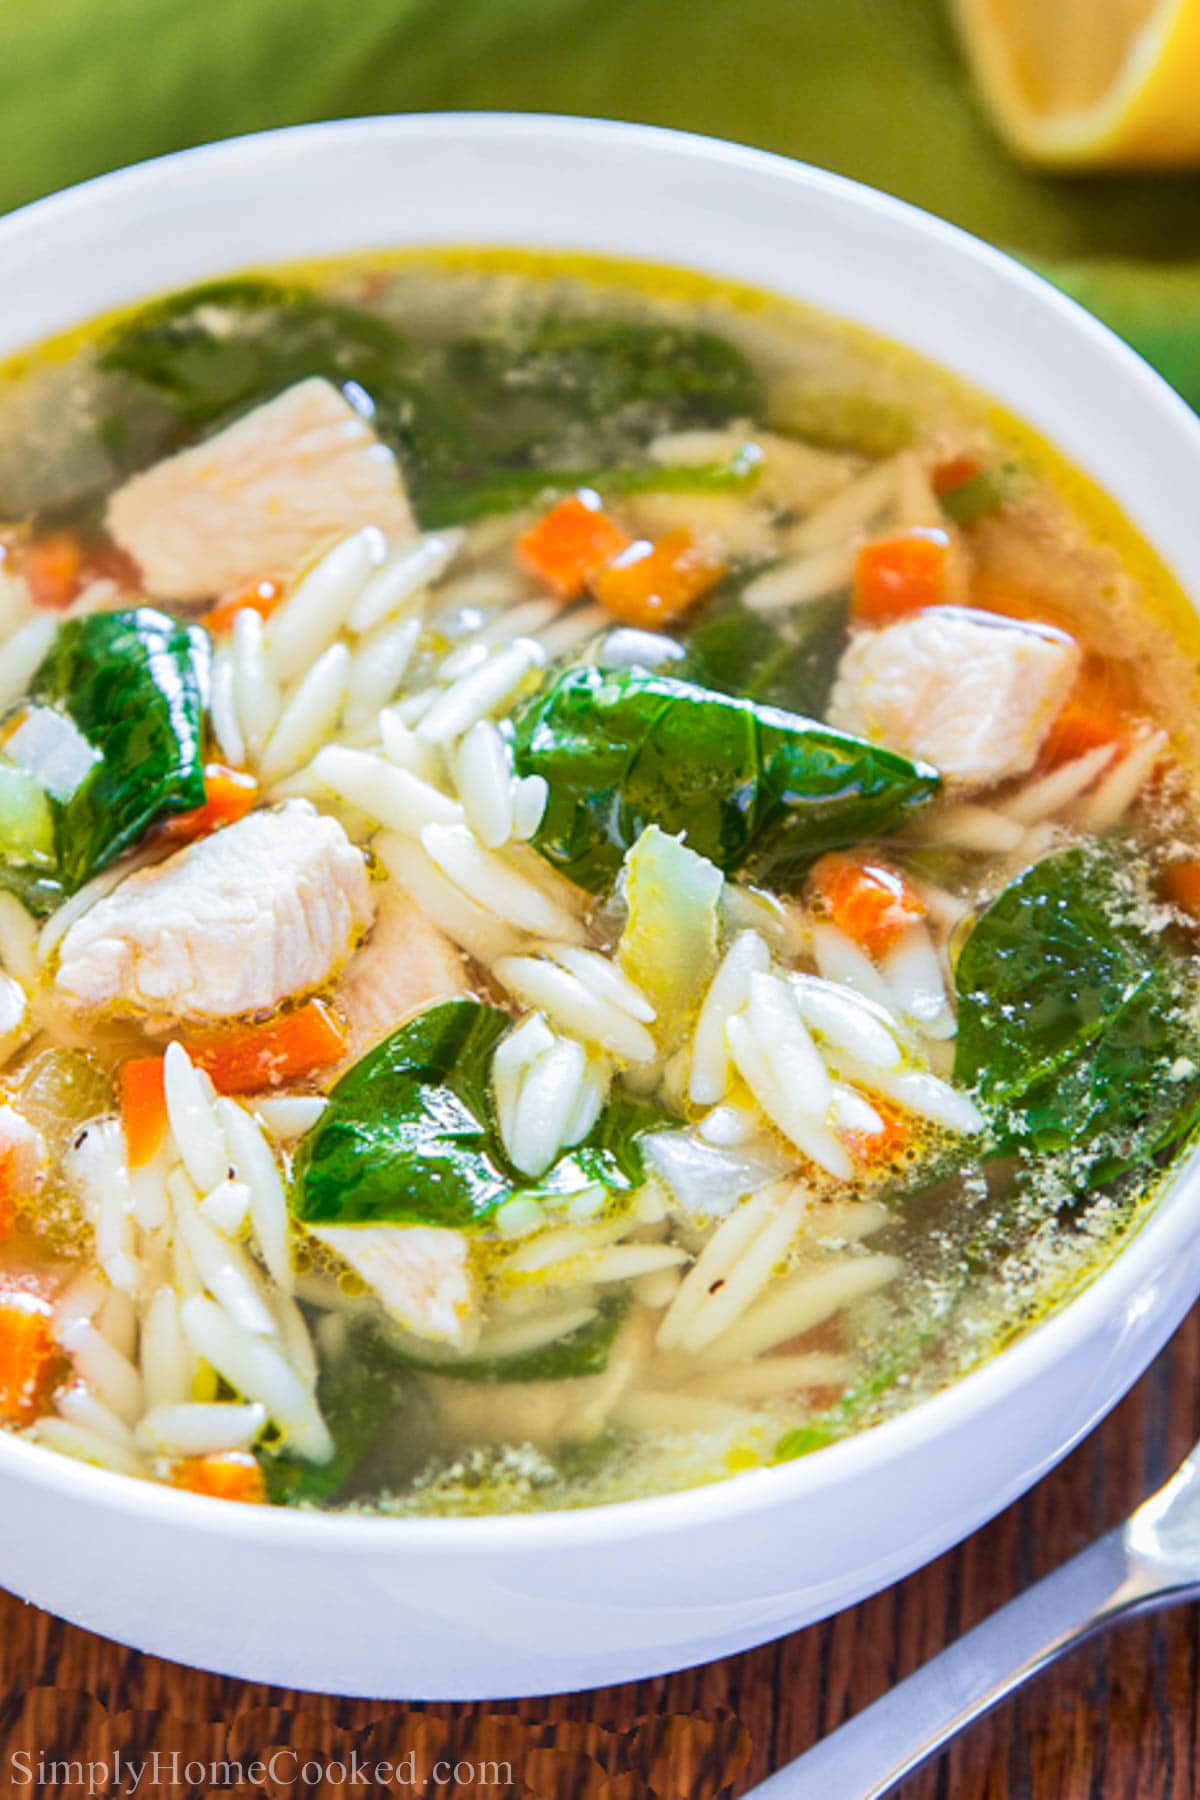 Bowl of Lemon Chicken Orzo Soup with orzo, spinach, chicken, and broth.